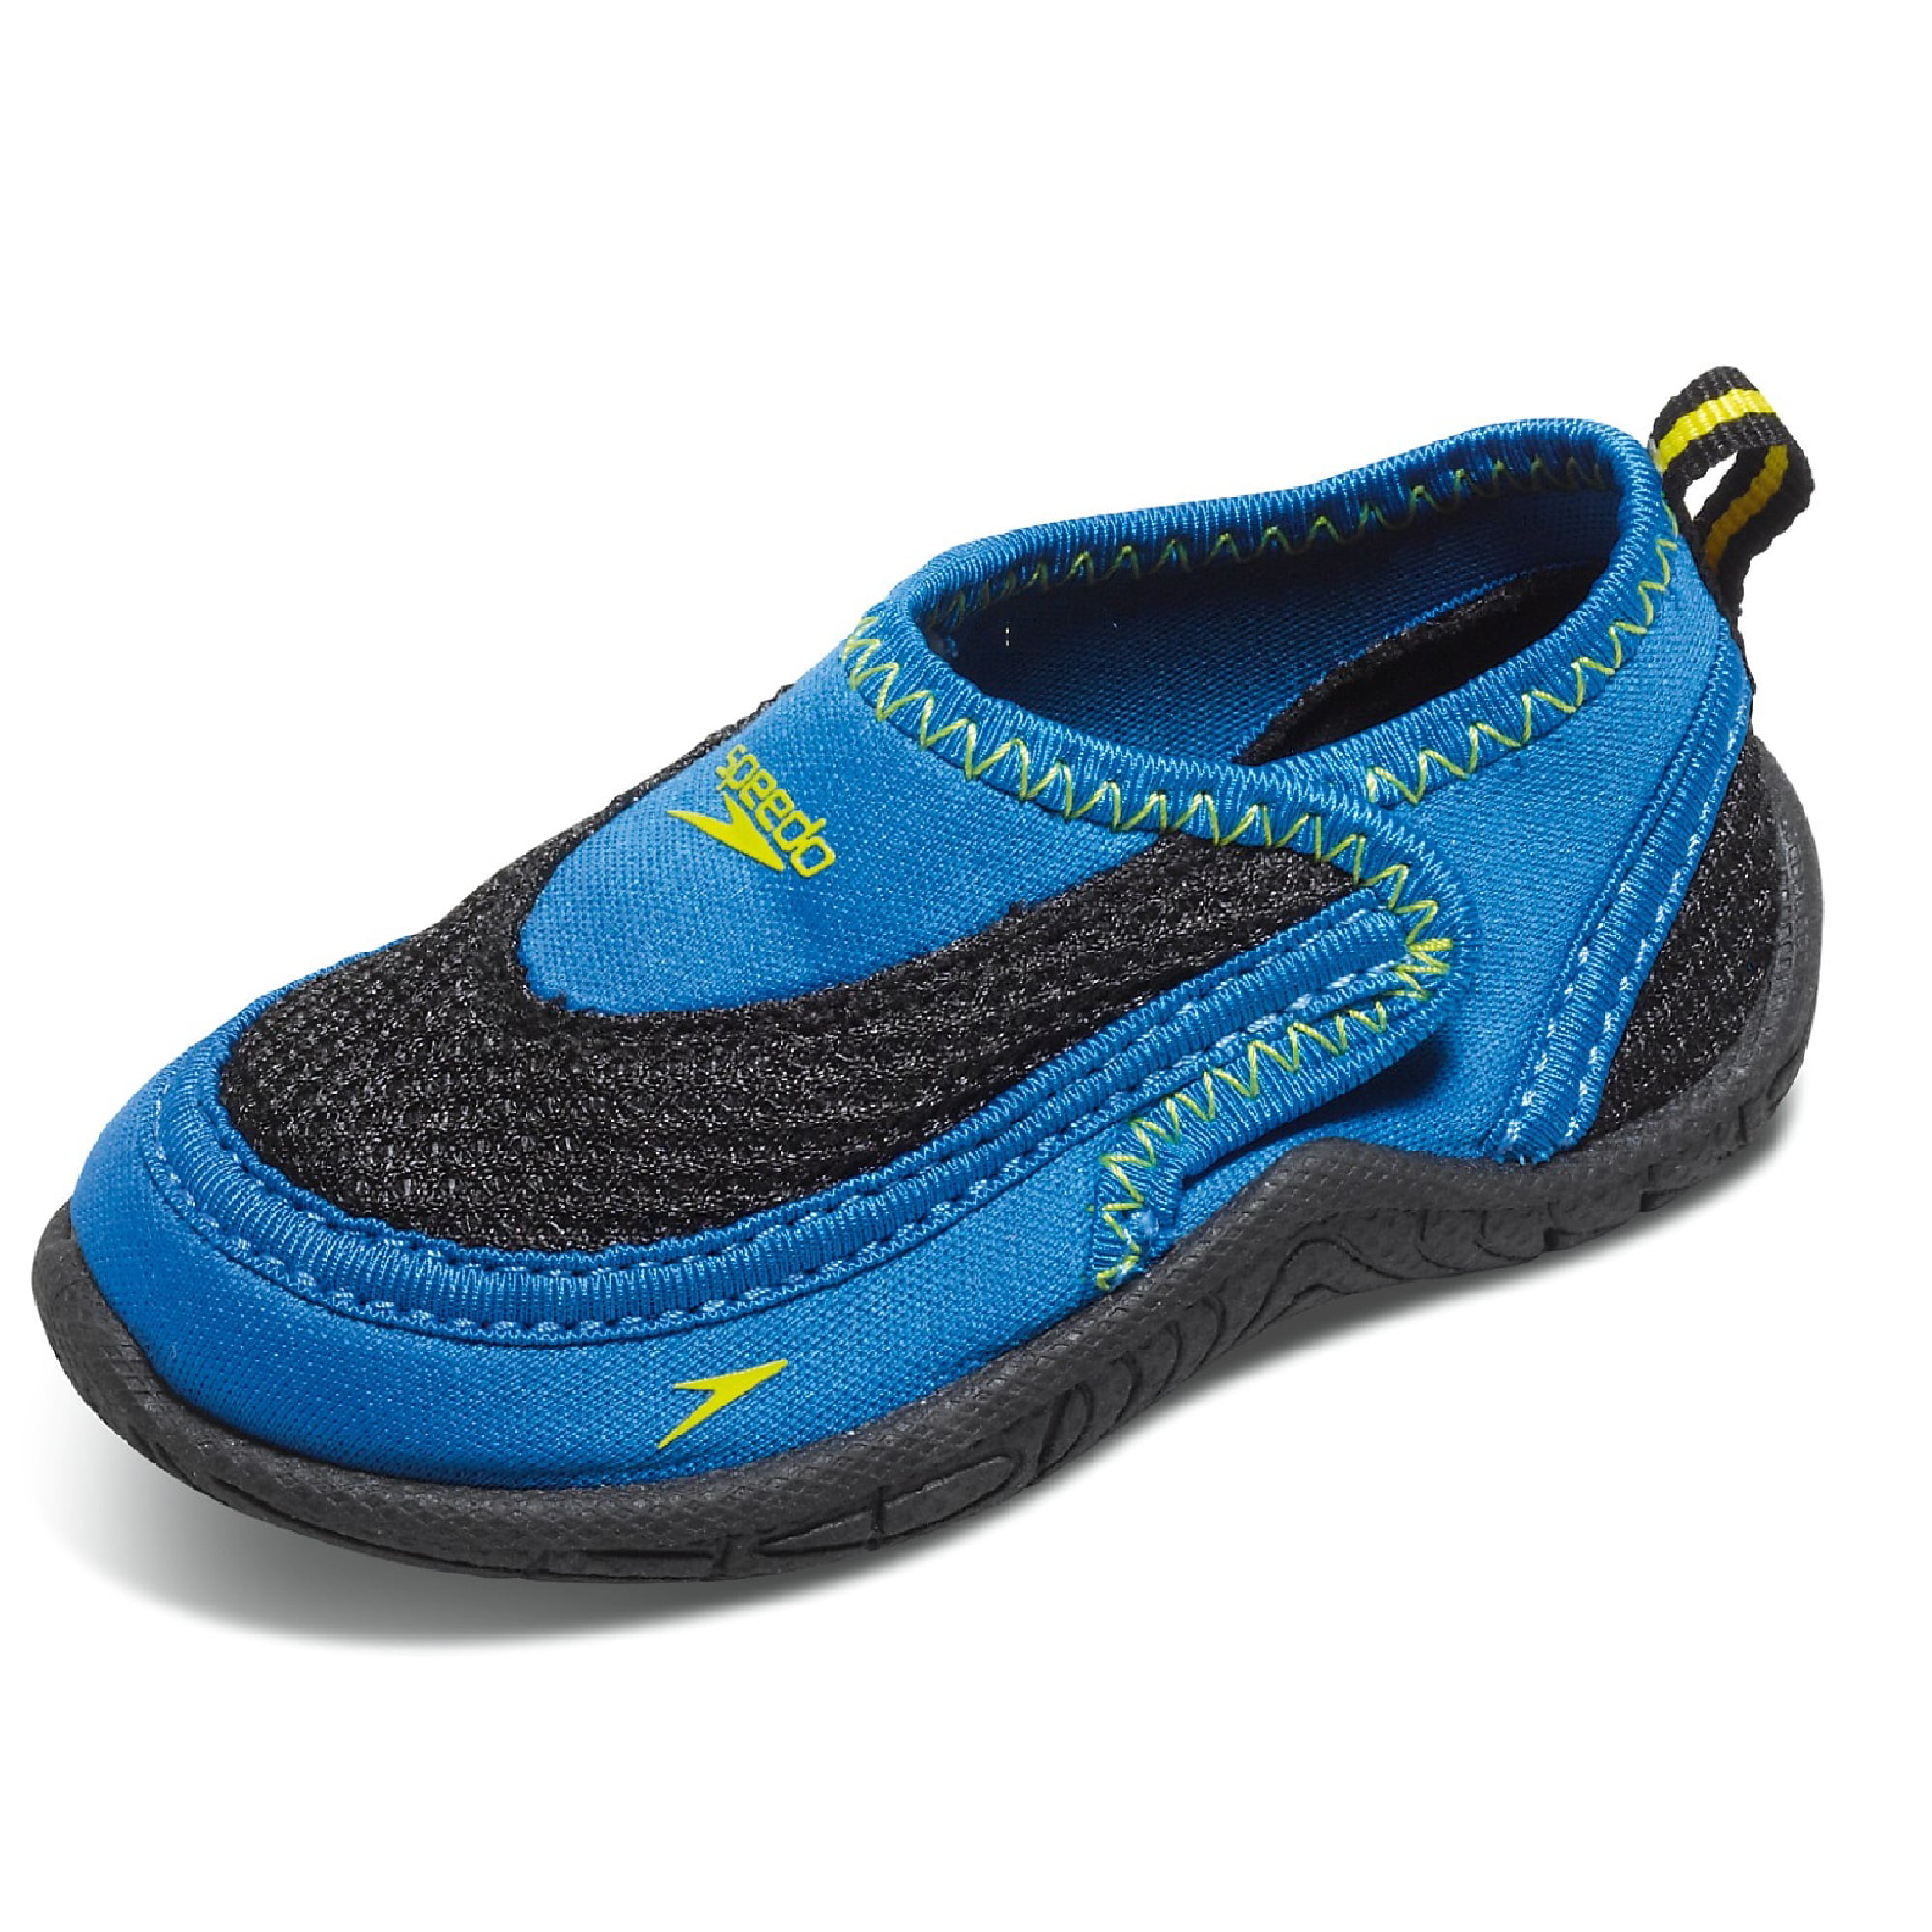 Speedo Kids Boys Water Shoes Large 9-10 Blue for sale online 